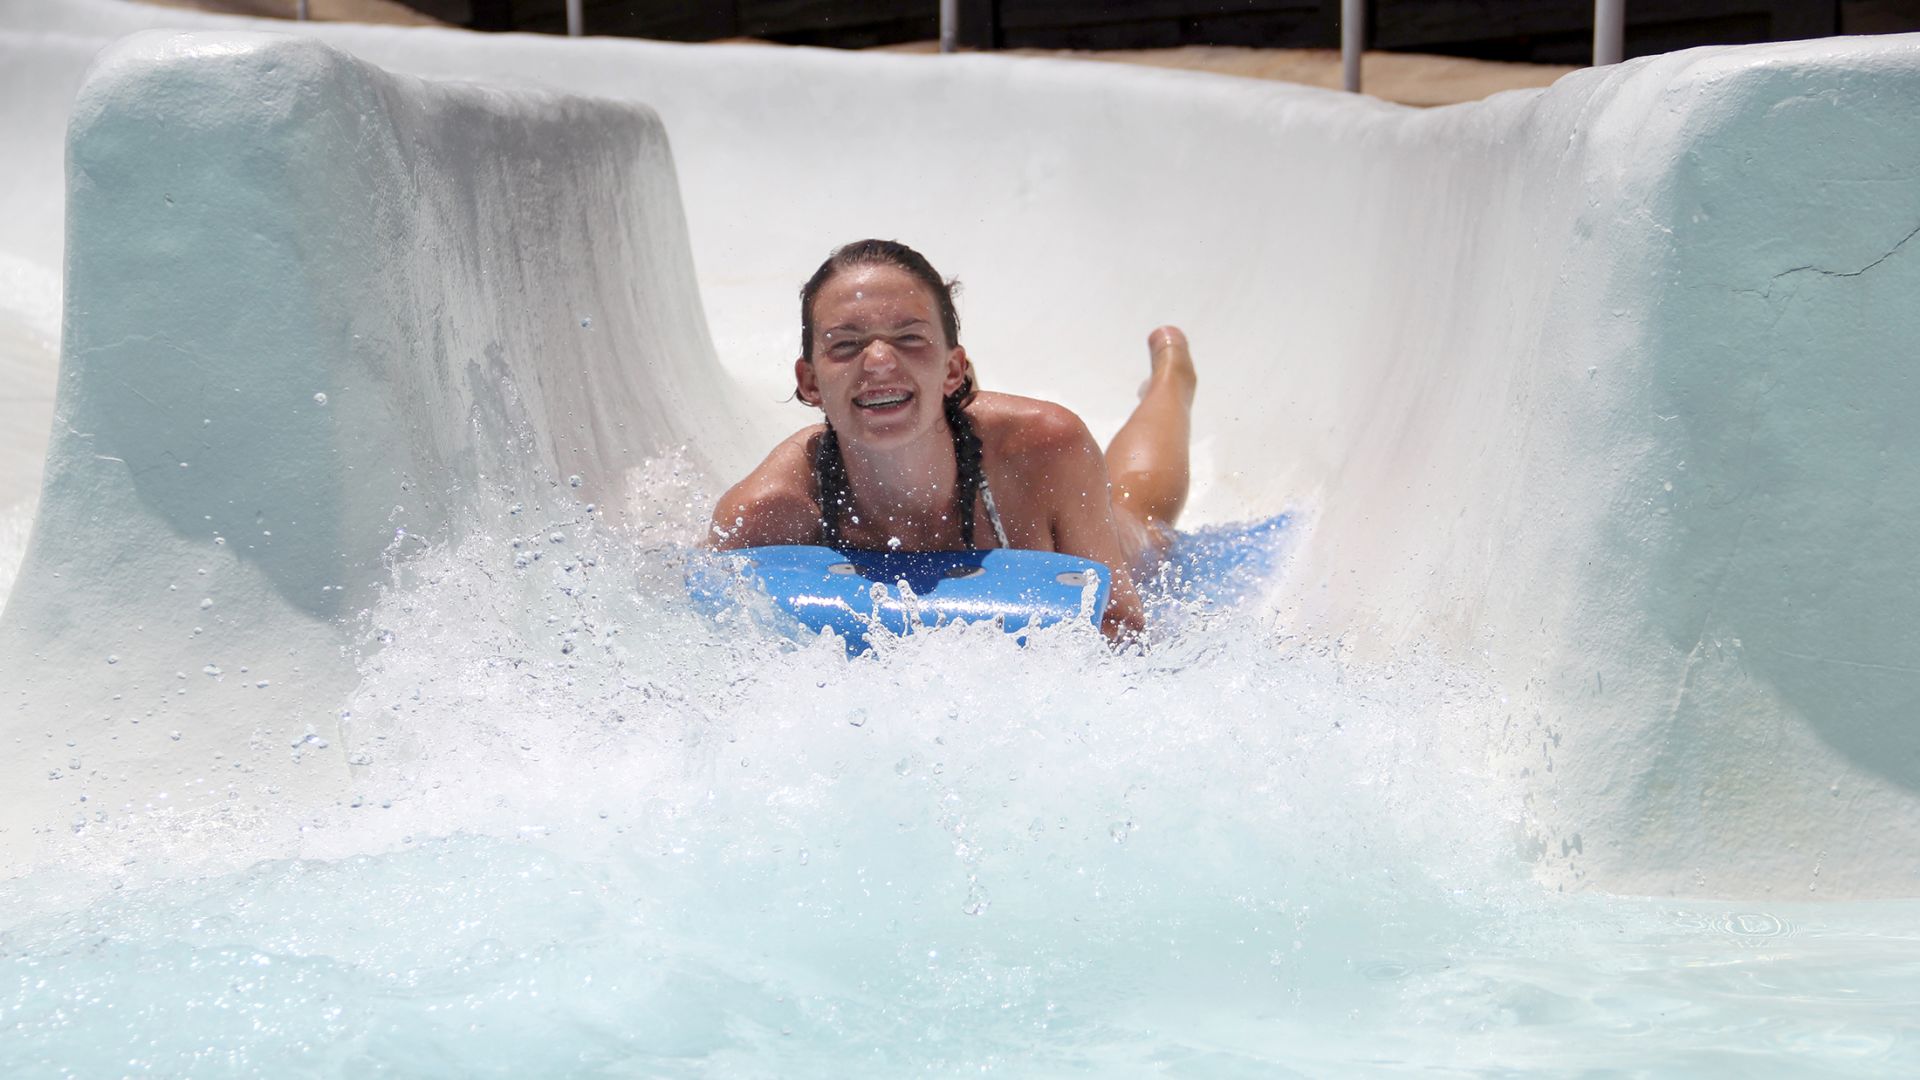 A Young Girl Riding A Wave On A Surfboard In The Water